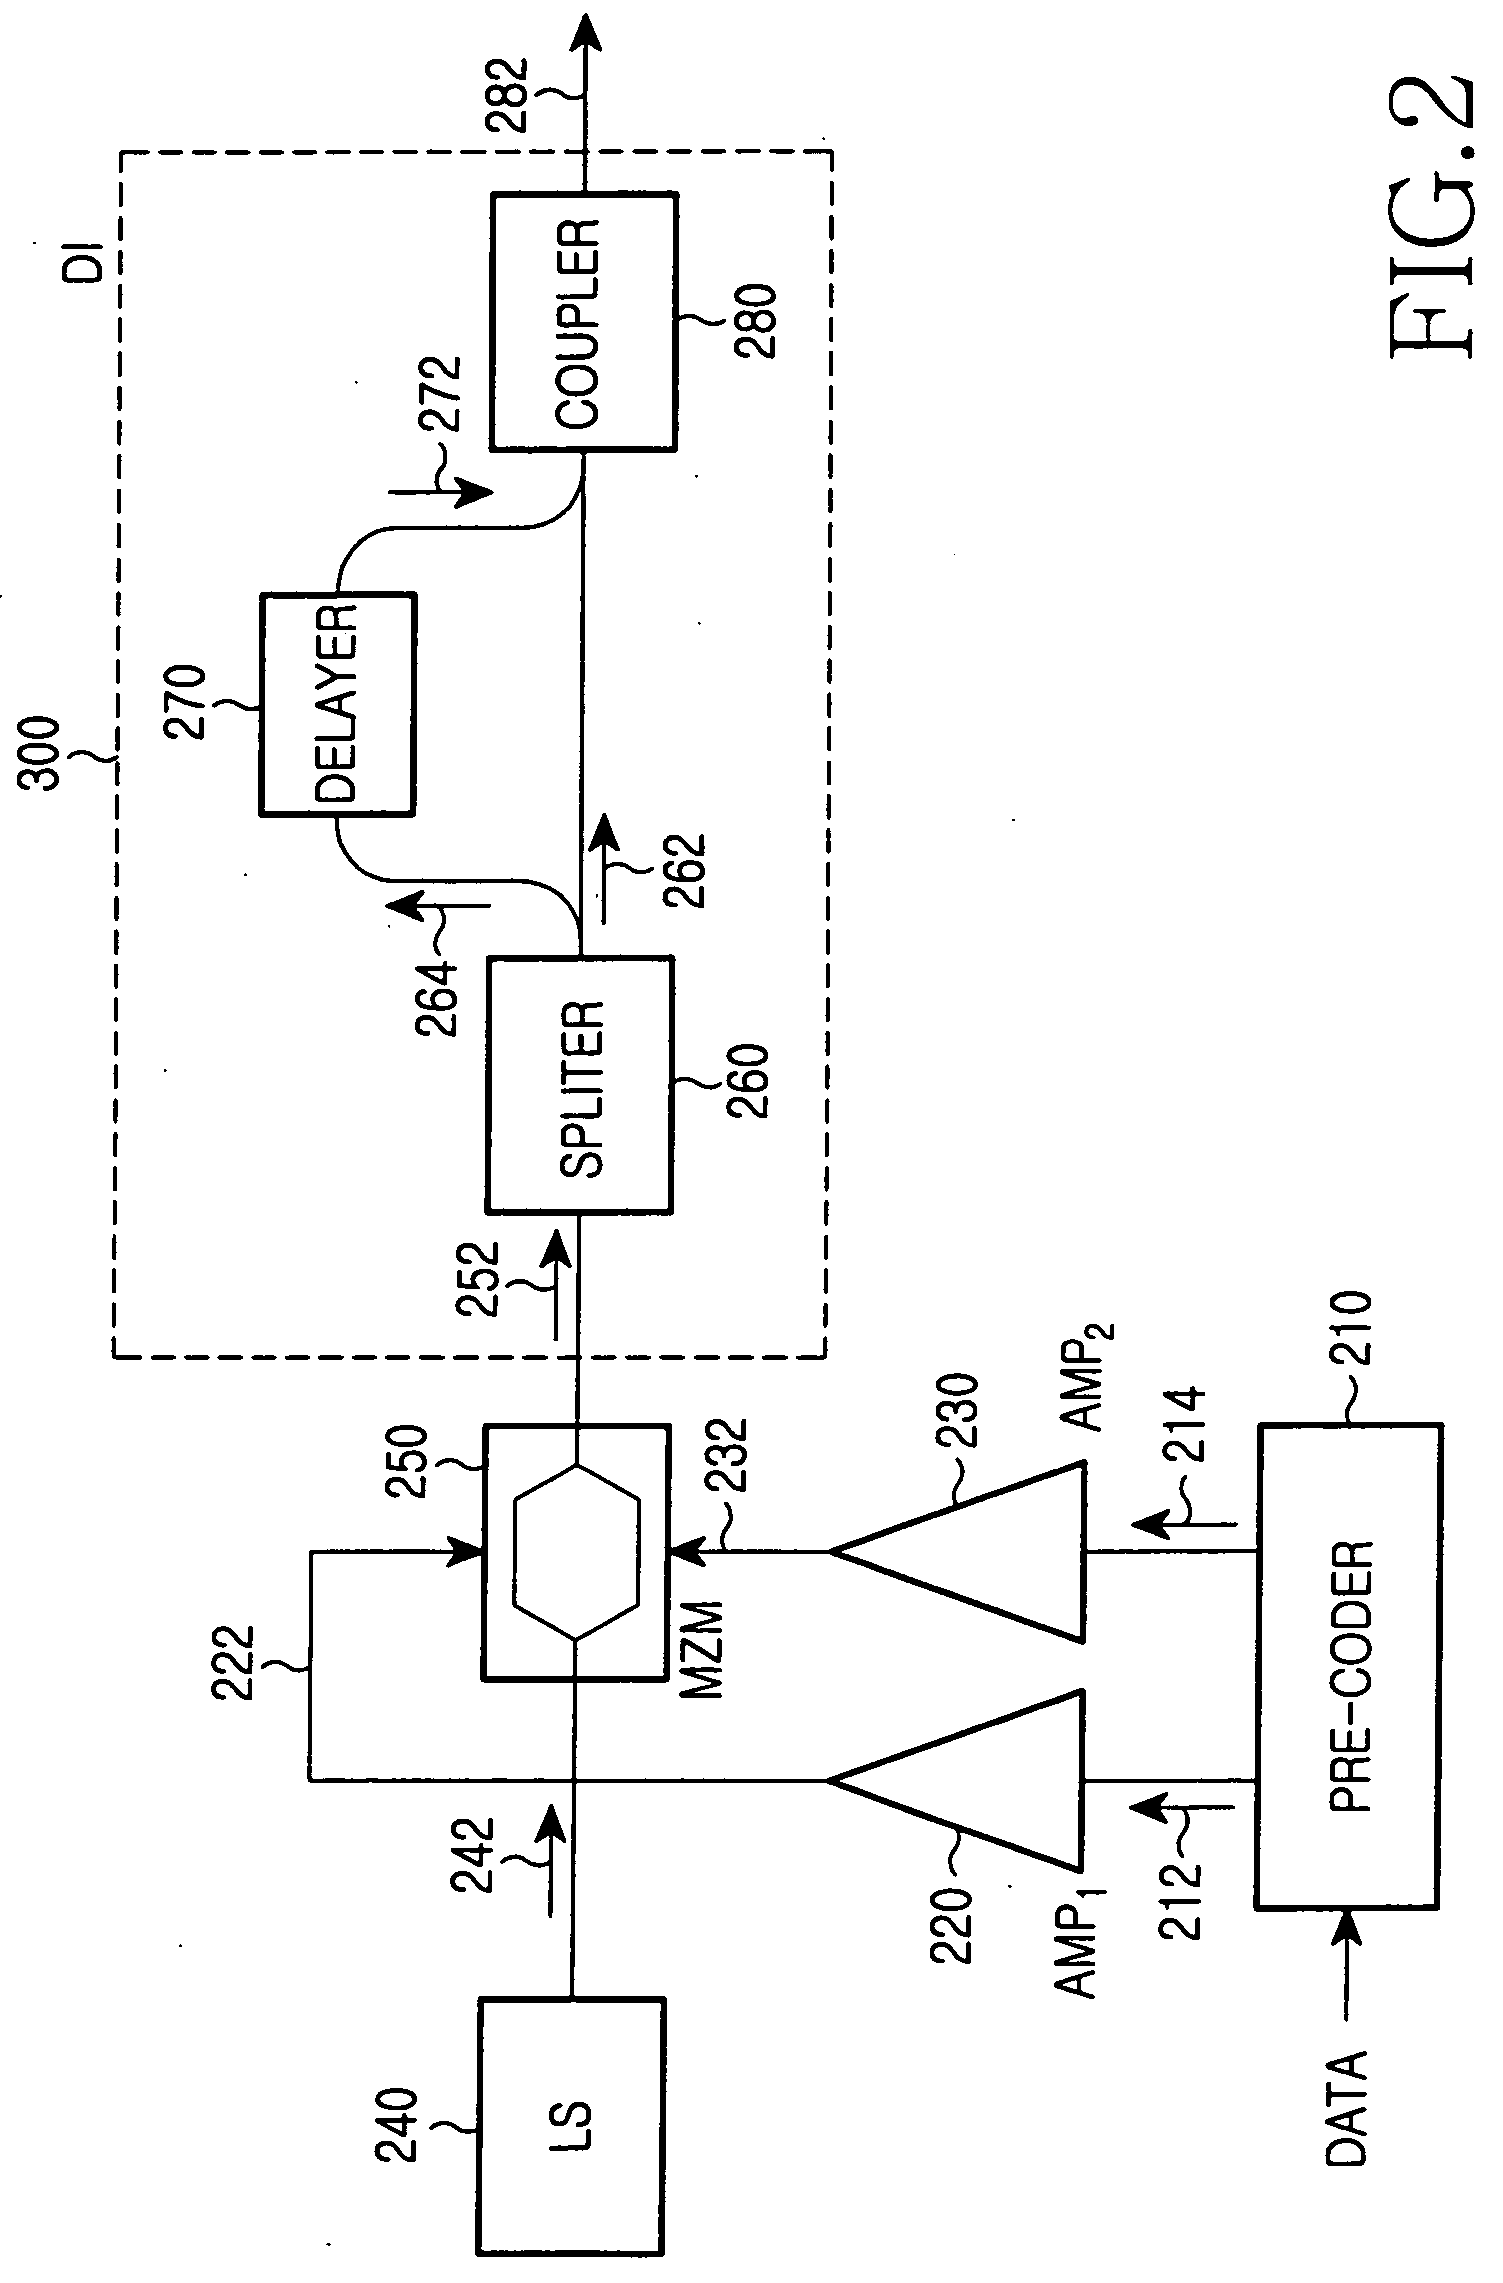 Duo-binary optical transmitter tolerant to chromatic dispersion